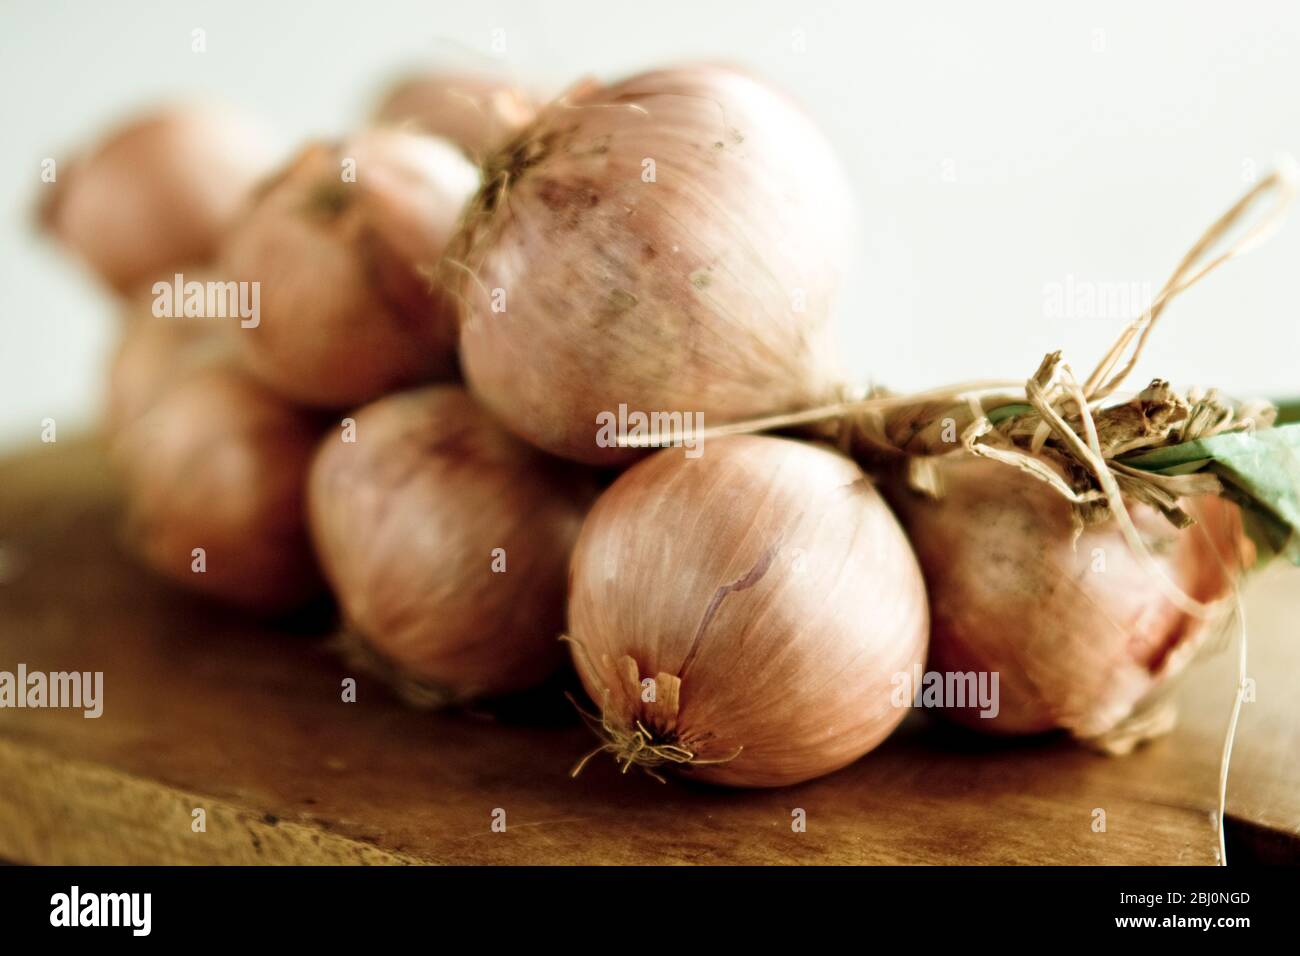 String of onions lying on wooden board - Stock Photo